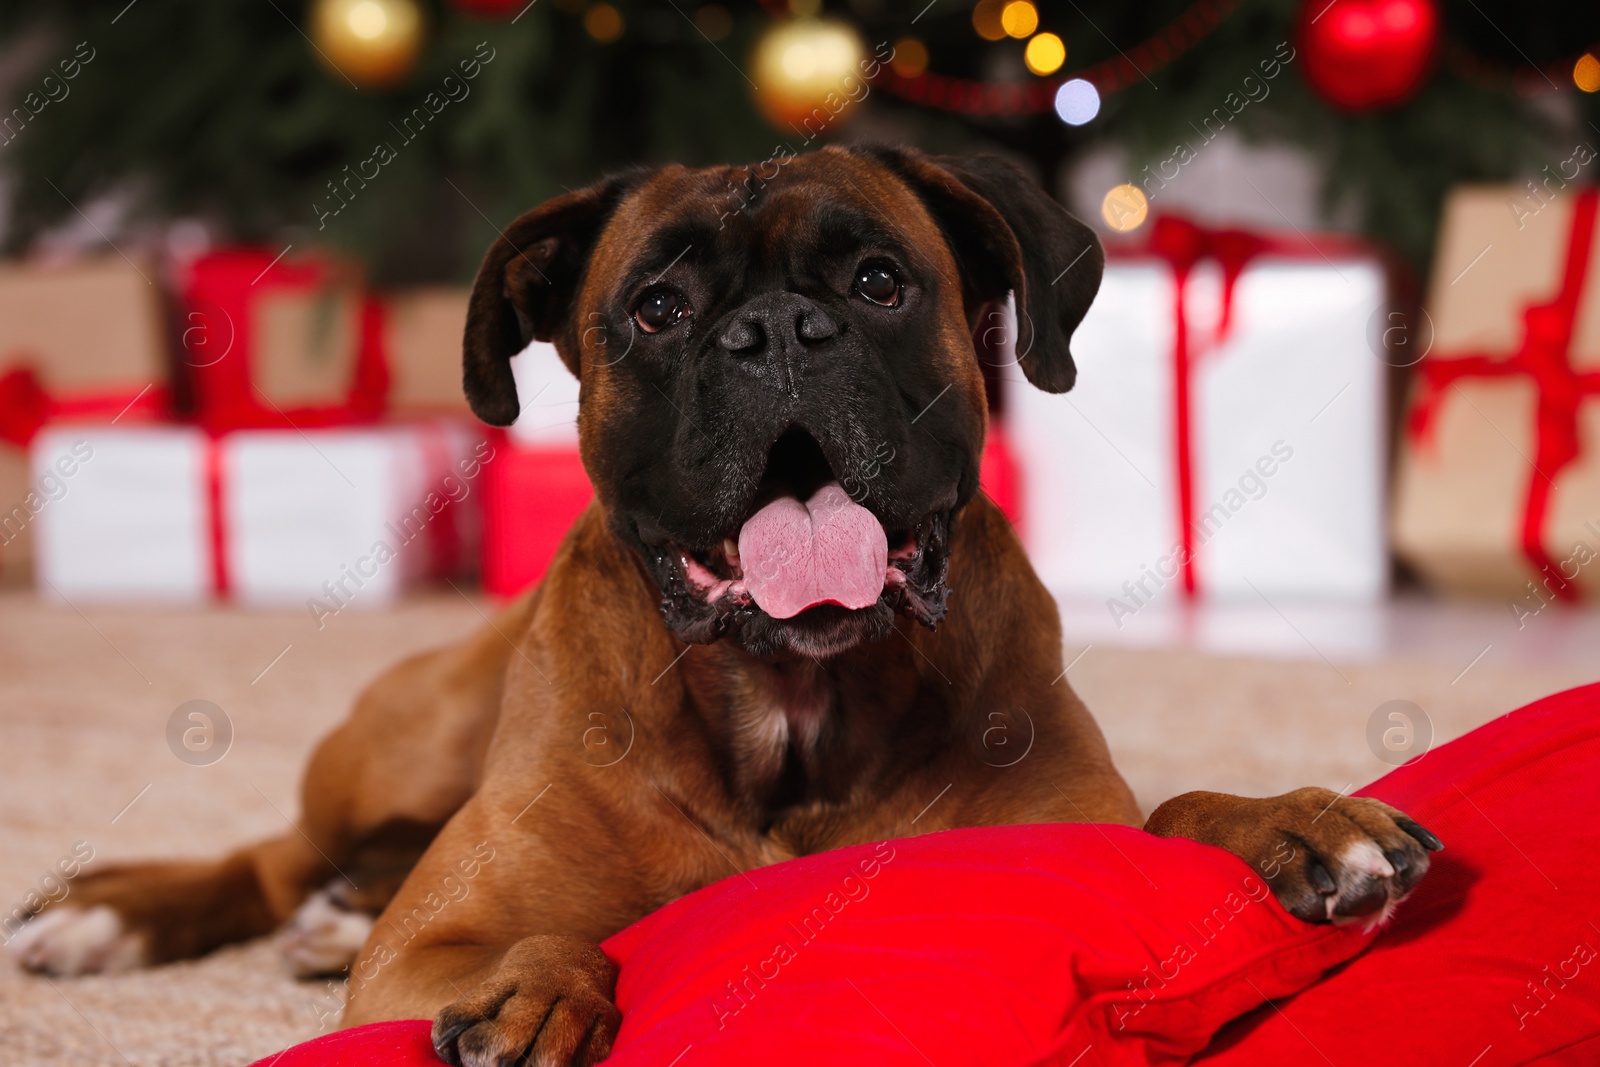 Photo of Cute dog on pillows in room decorated for Christmas